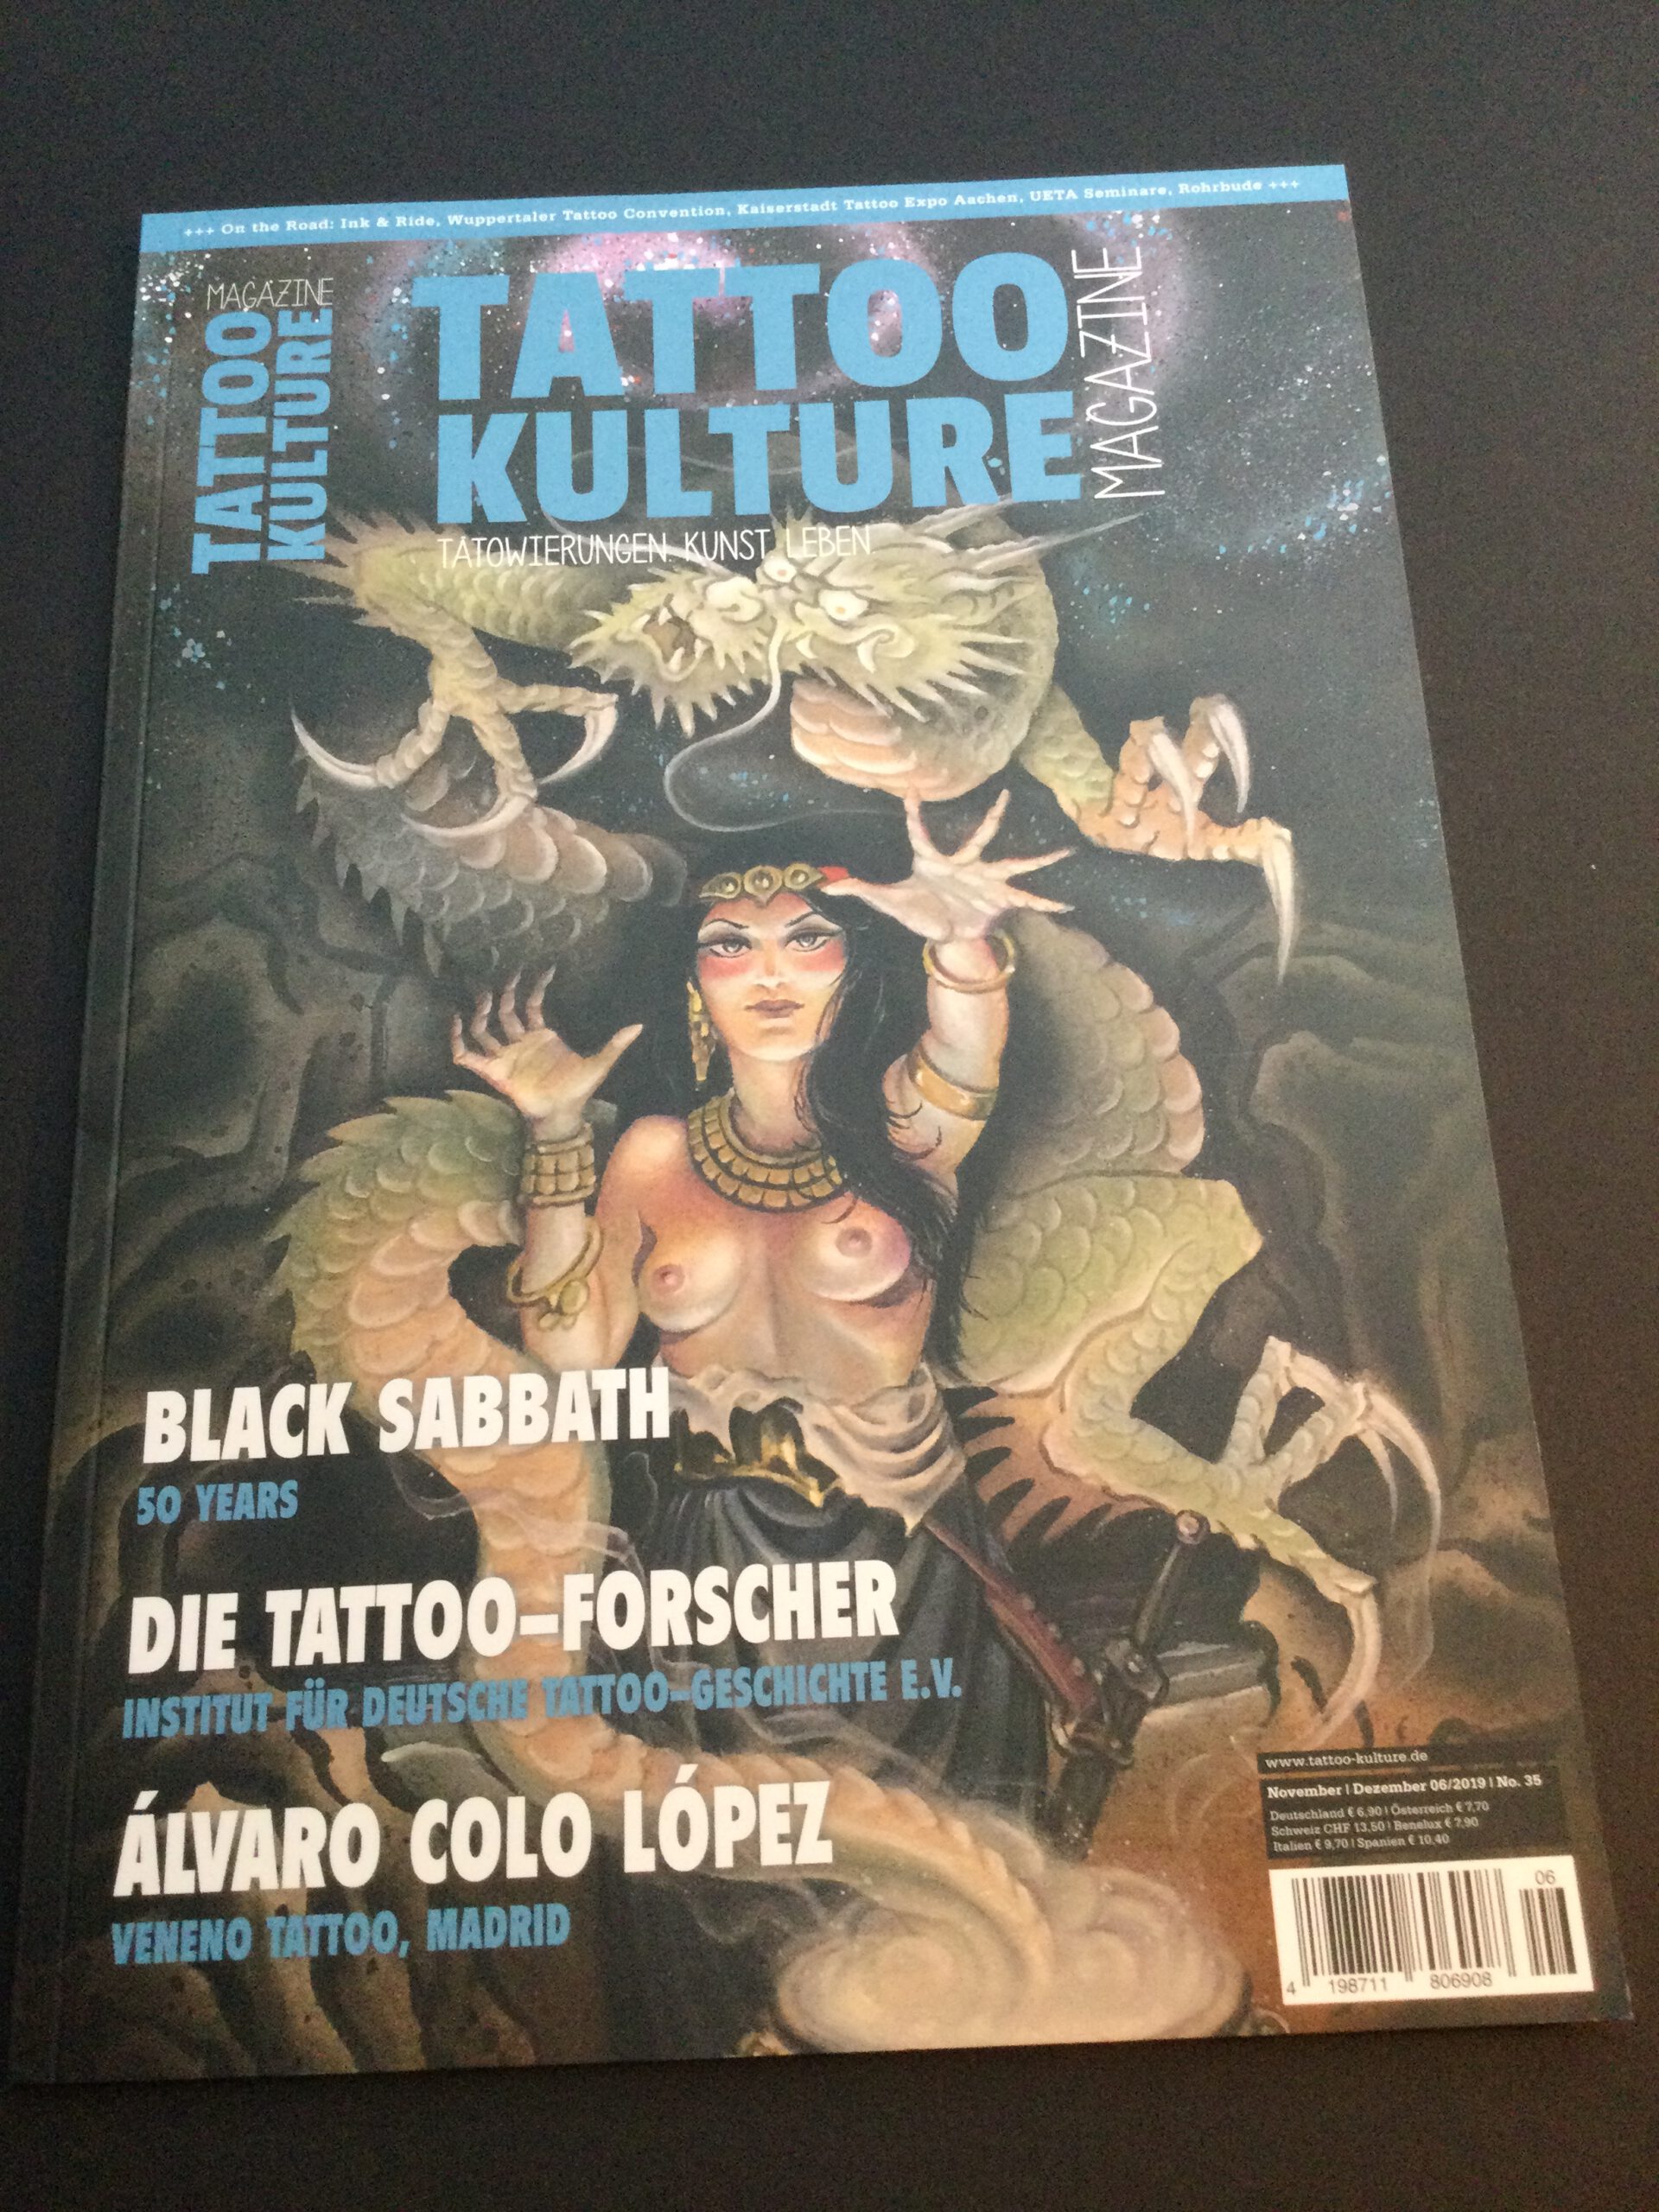 A sorceress surrounded by a green dragon on the front page cover for Tattoo Kulture magazine